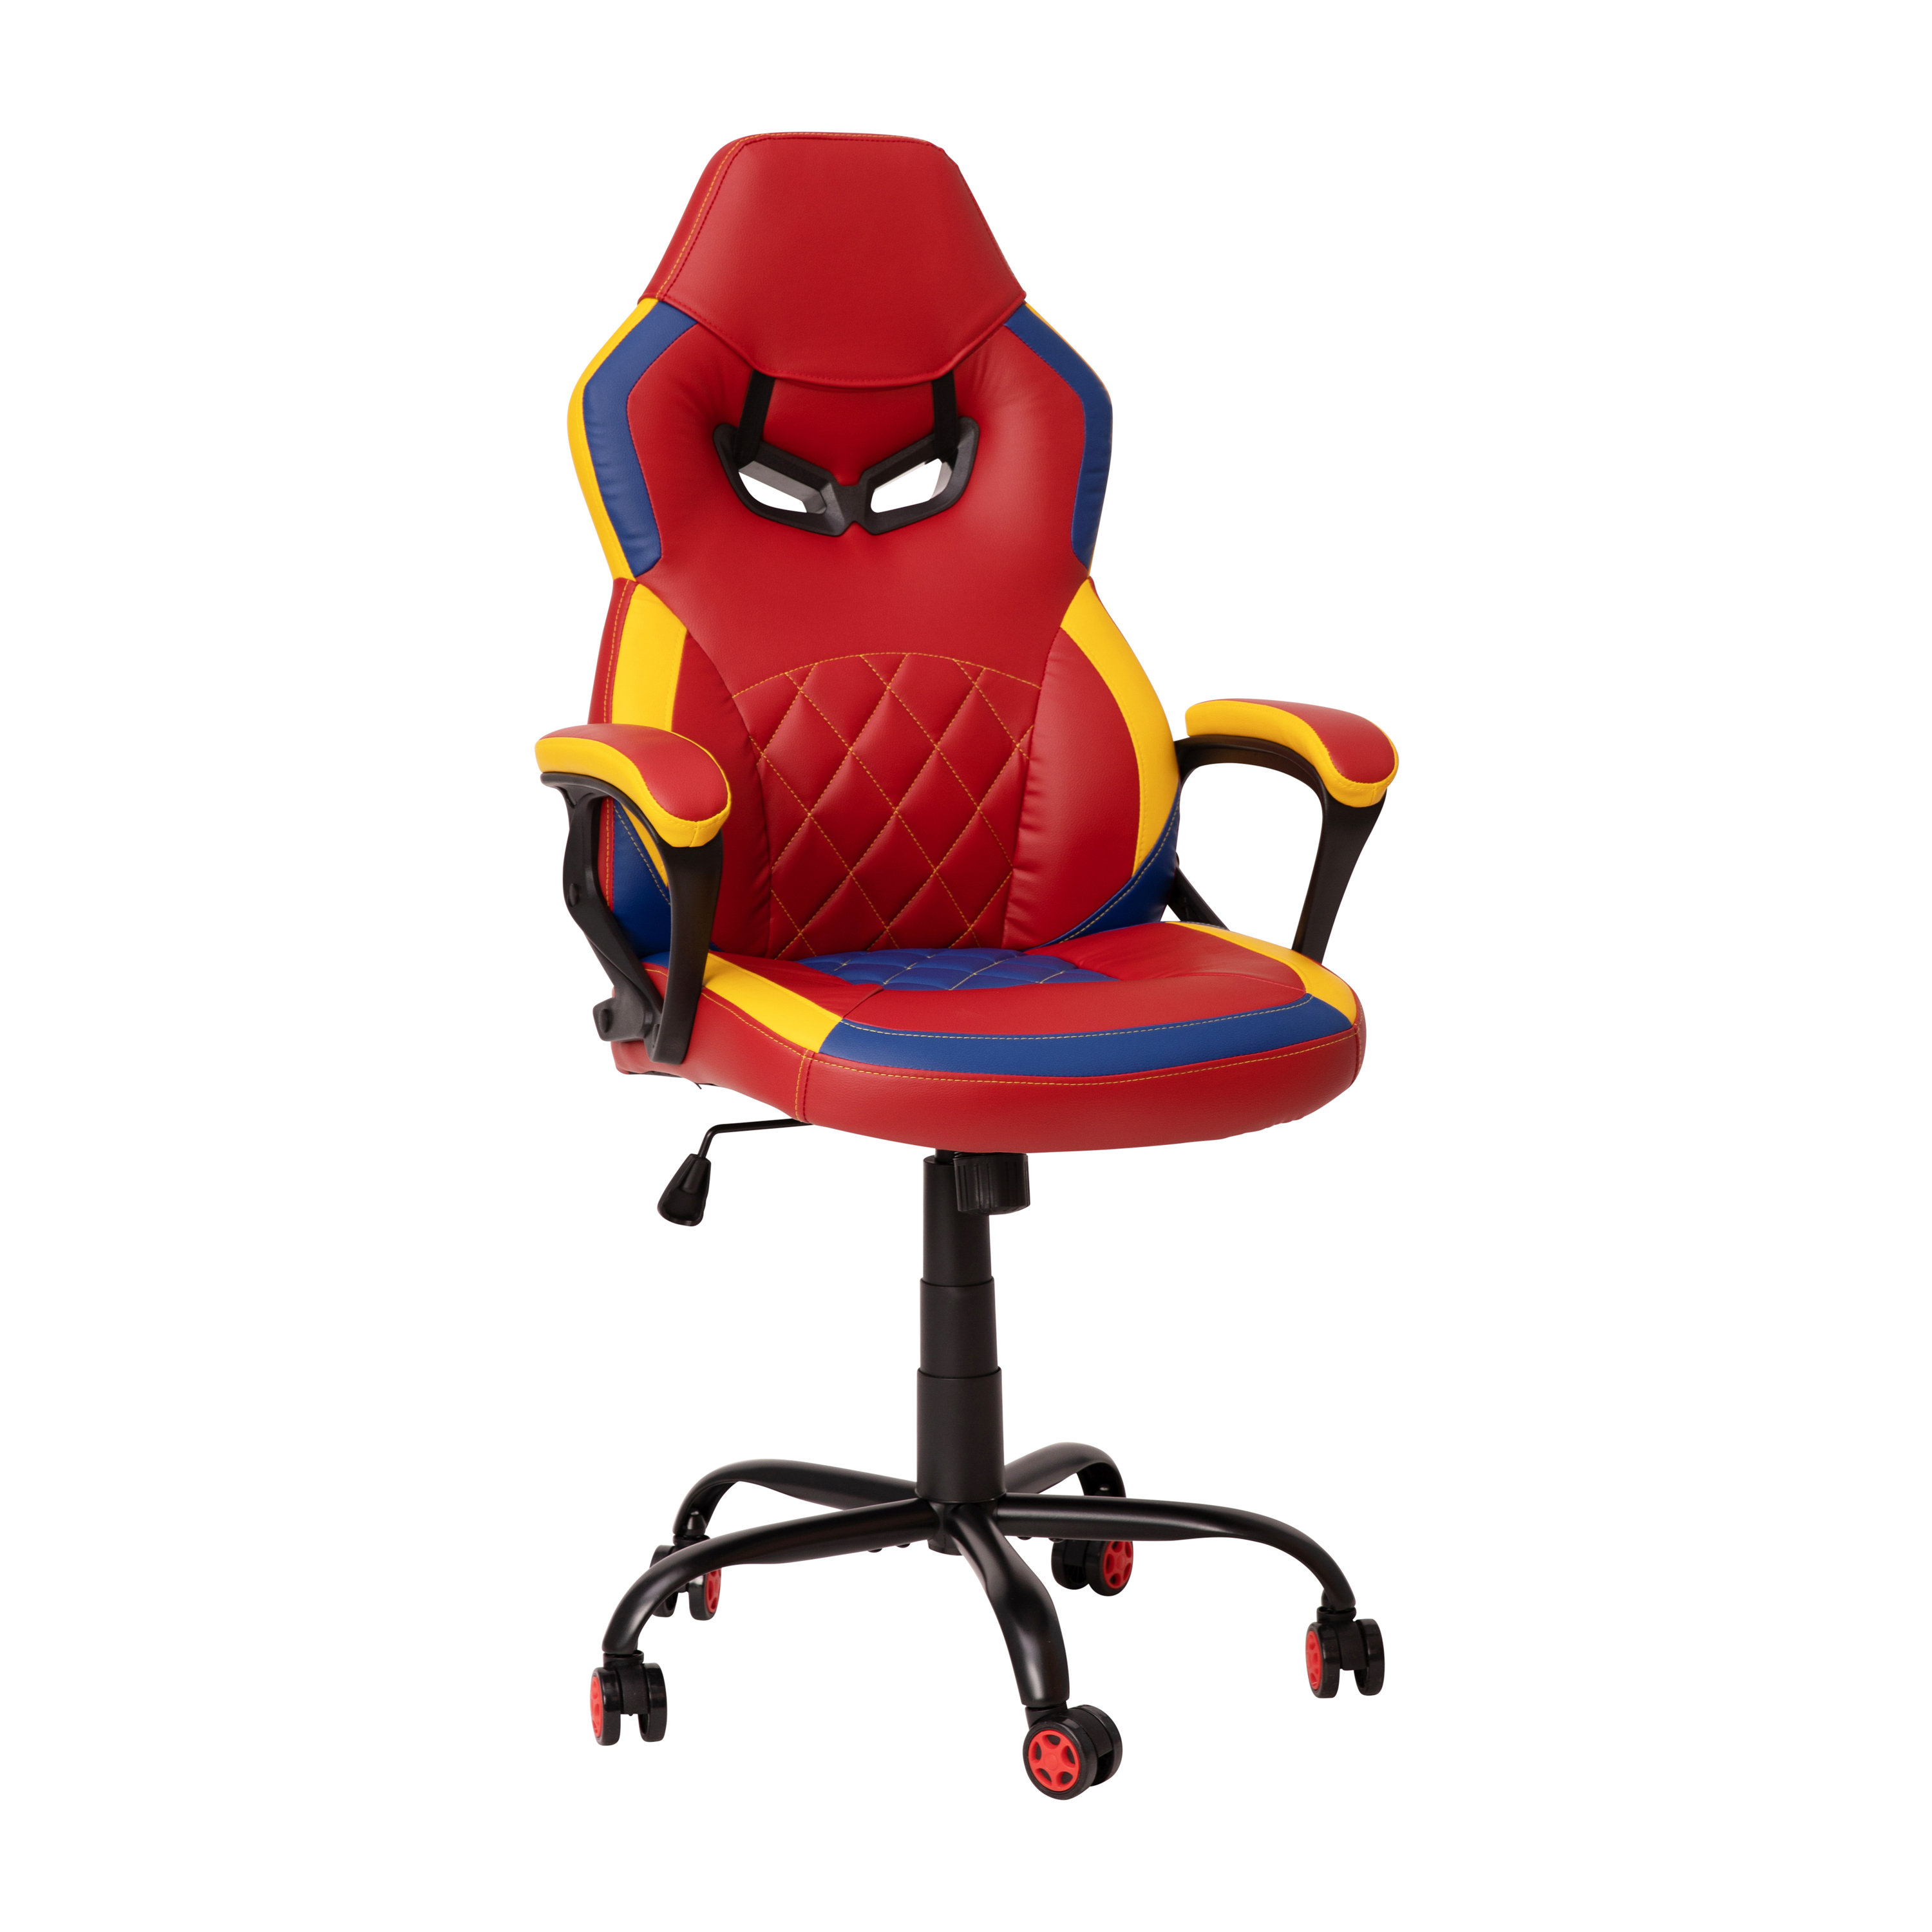 Flash Furniture UL-A074-RD-GG Ergonomic Red & Yellow Designer Gaming Chair with Red Dual Wheel Casters